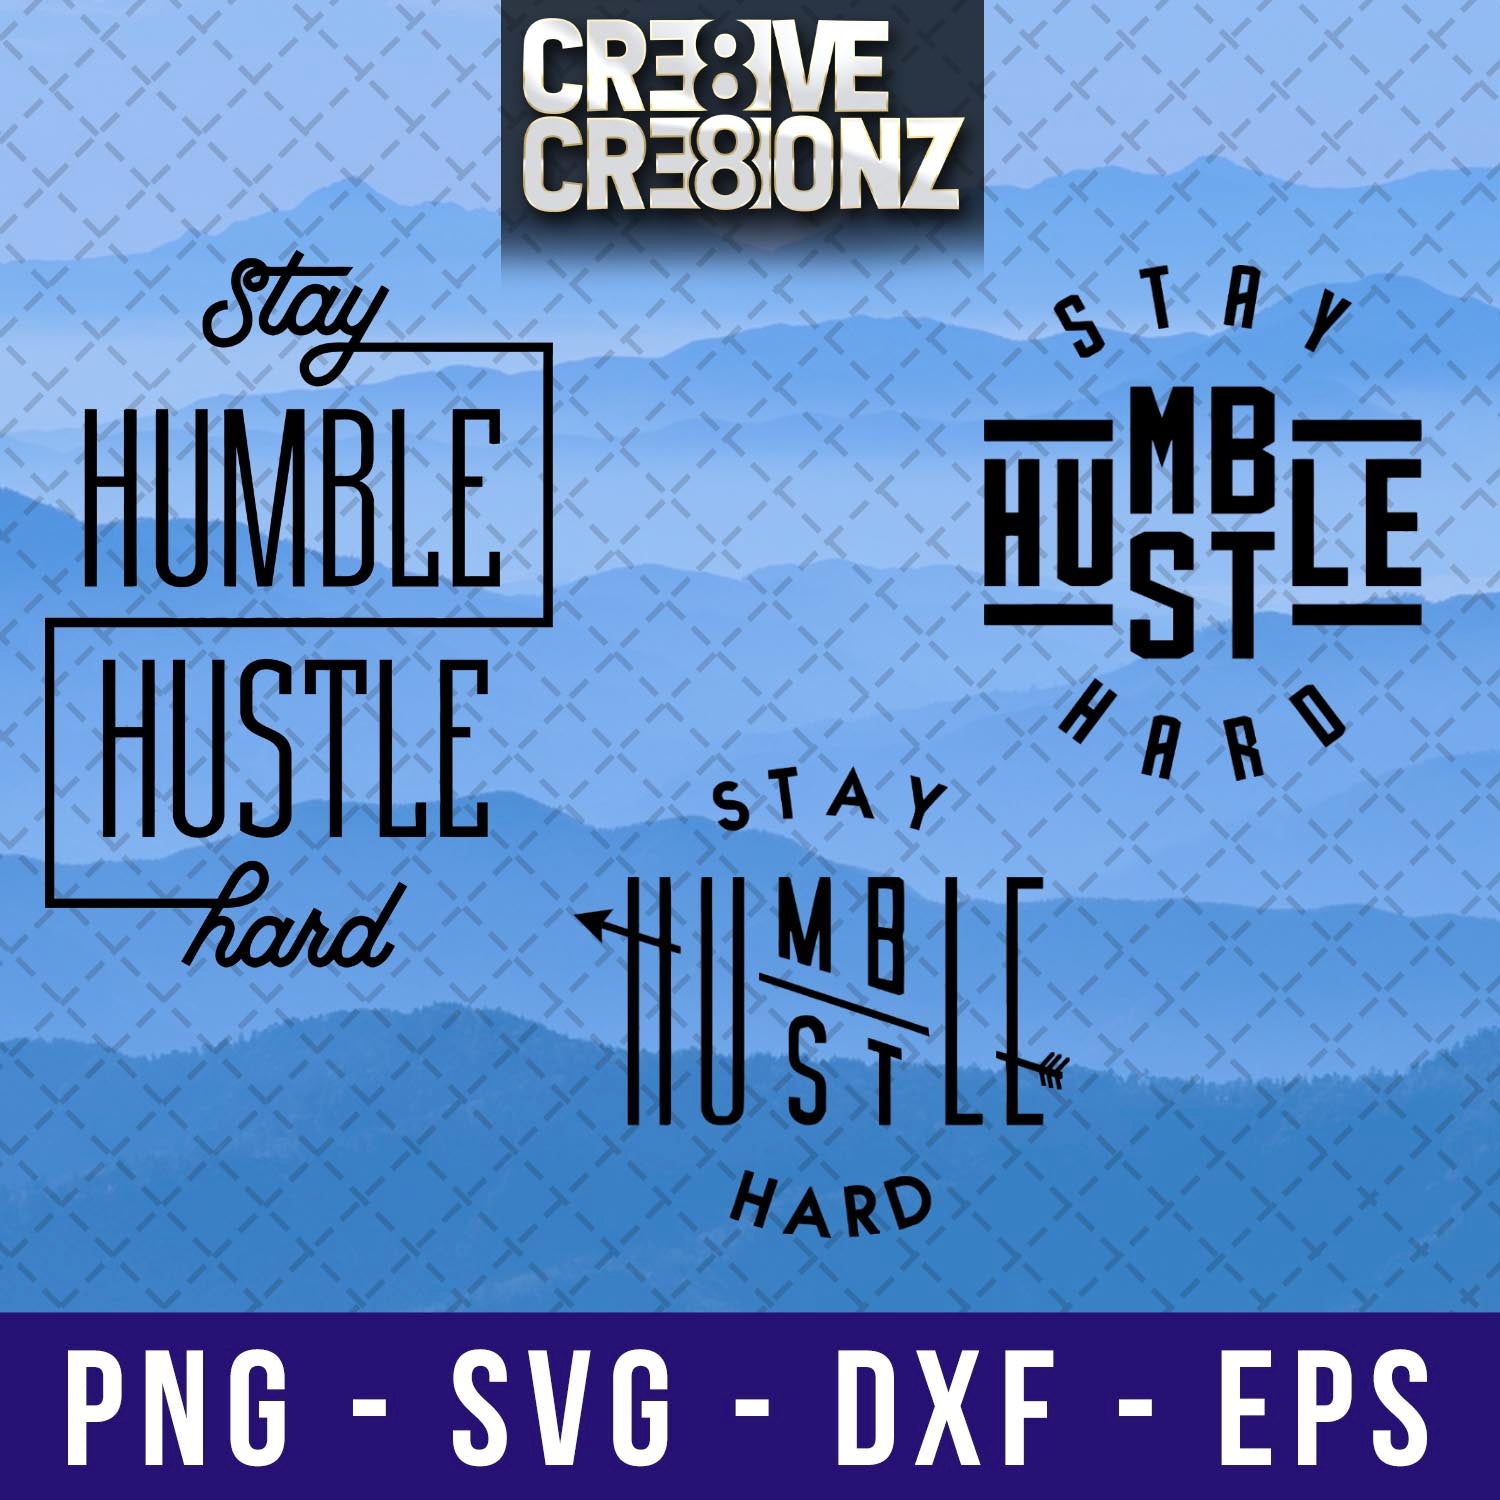 Stay Humble, Hustle Hard SVG - Cre8ive Cre8ionz